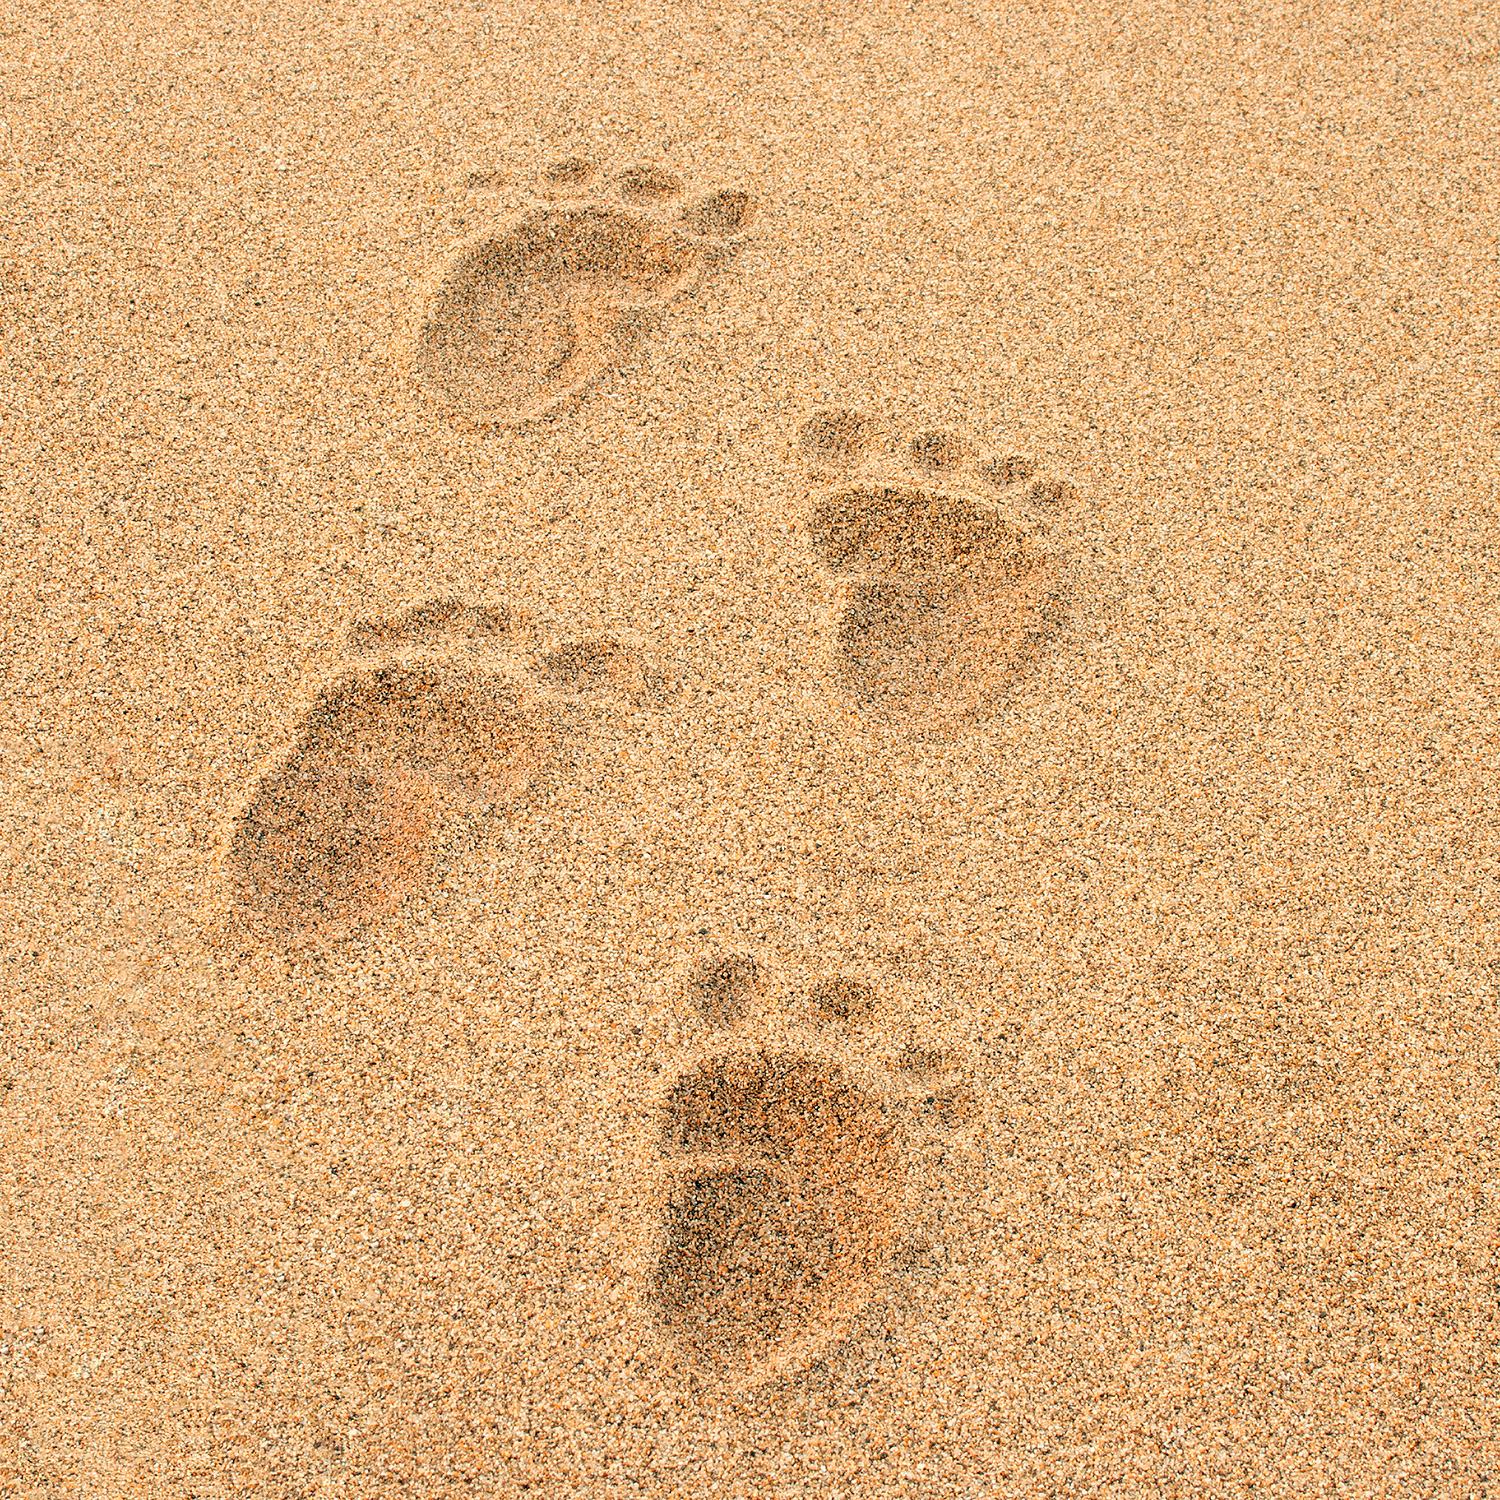 Baby Footprints On Beach Picture